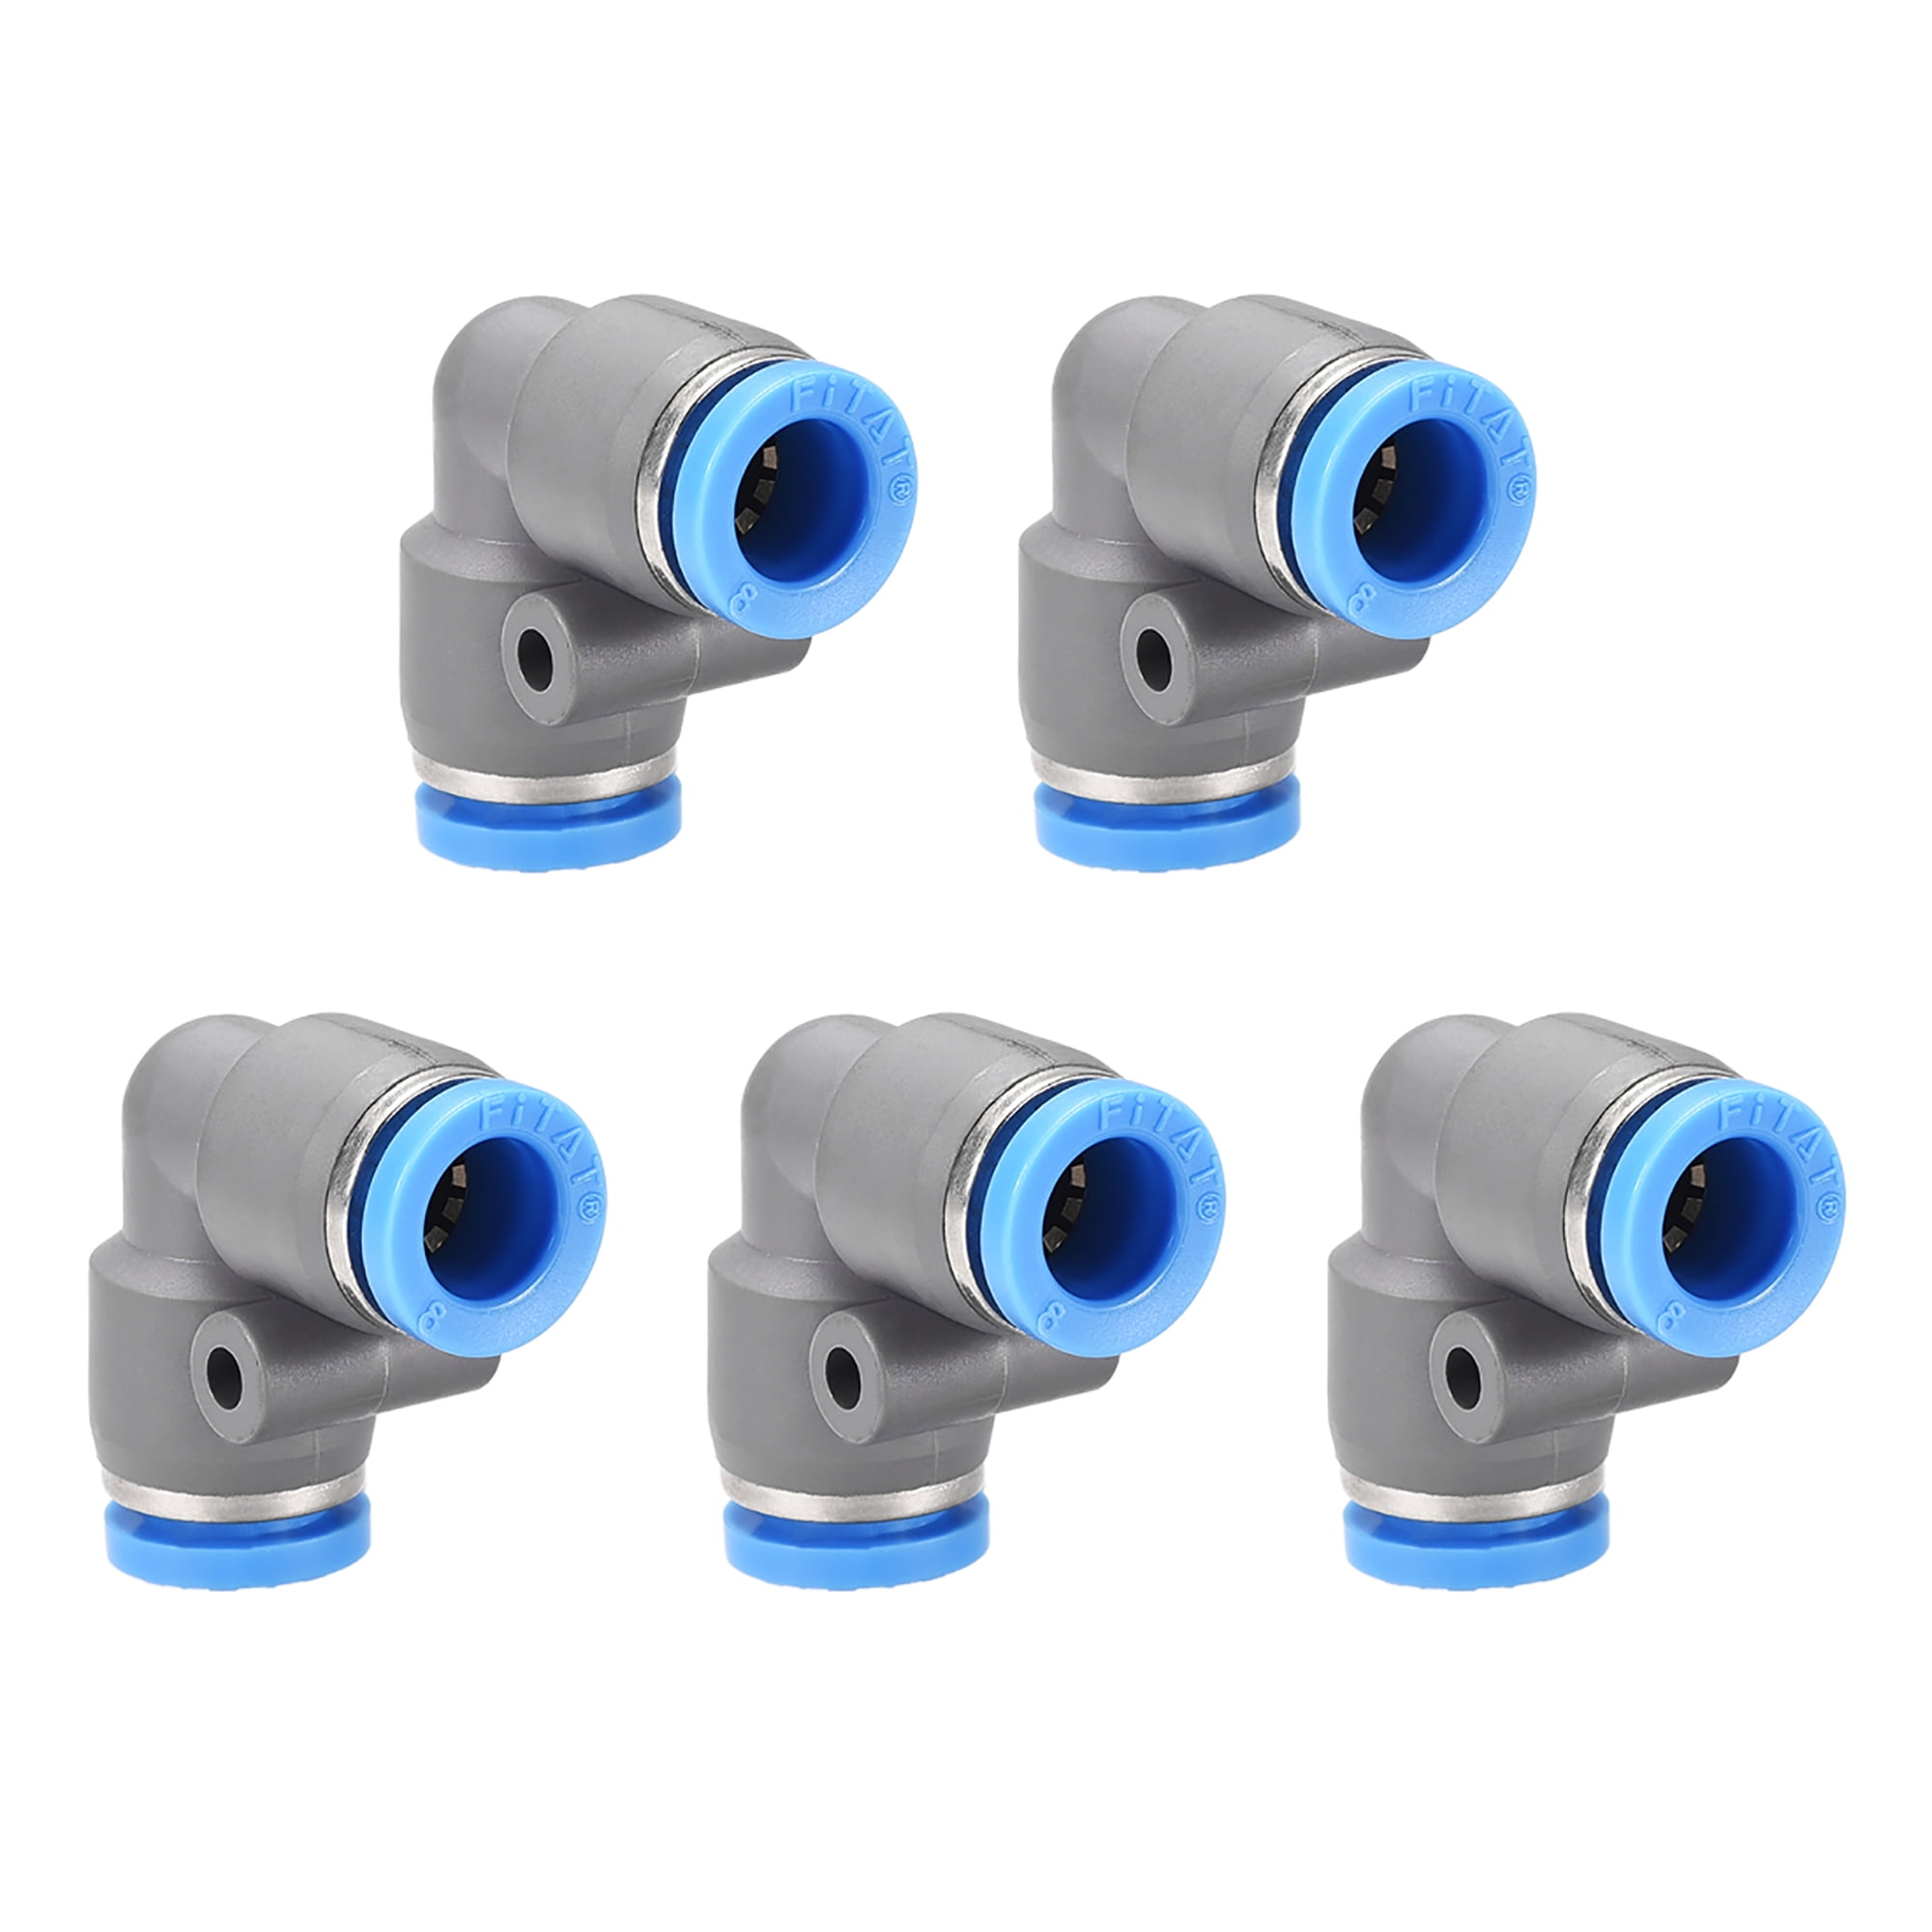 5PCS Pneumatic Push in Connect Fitting 8mm OD Tube Straight Union 